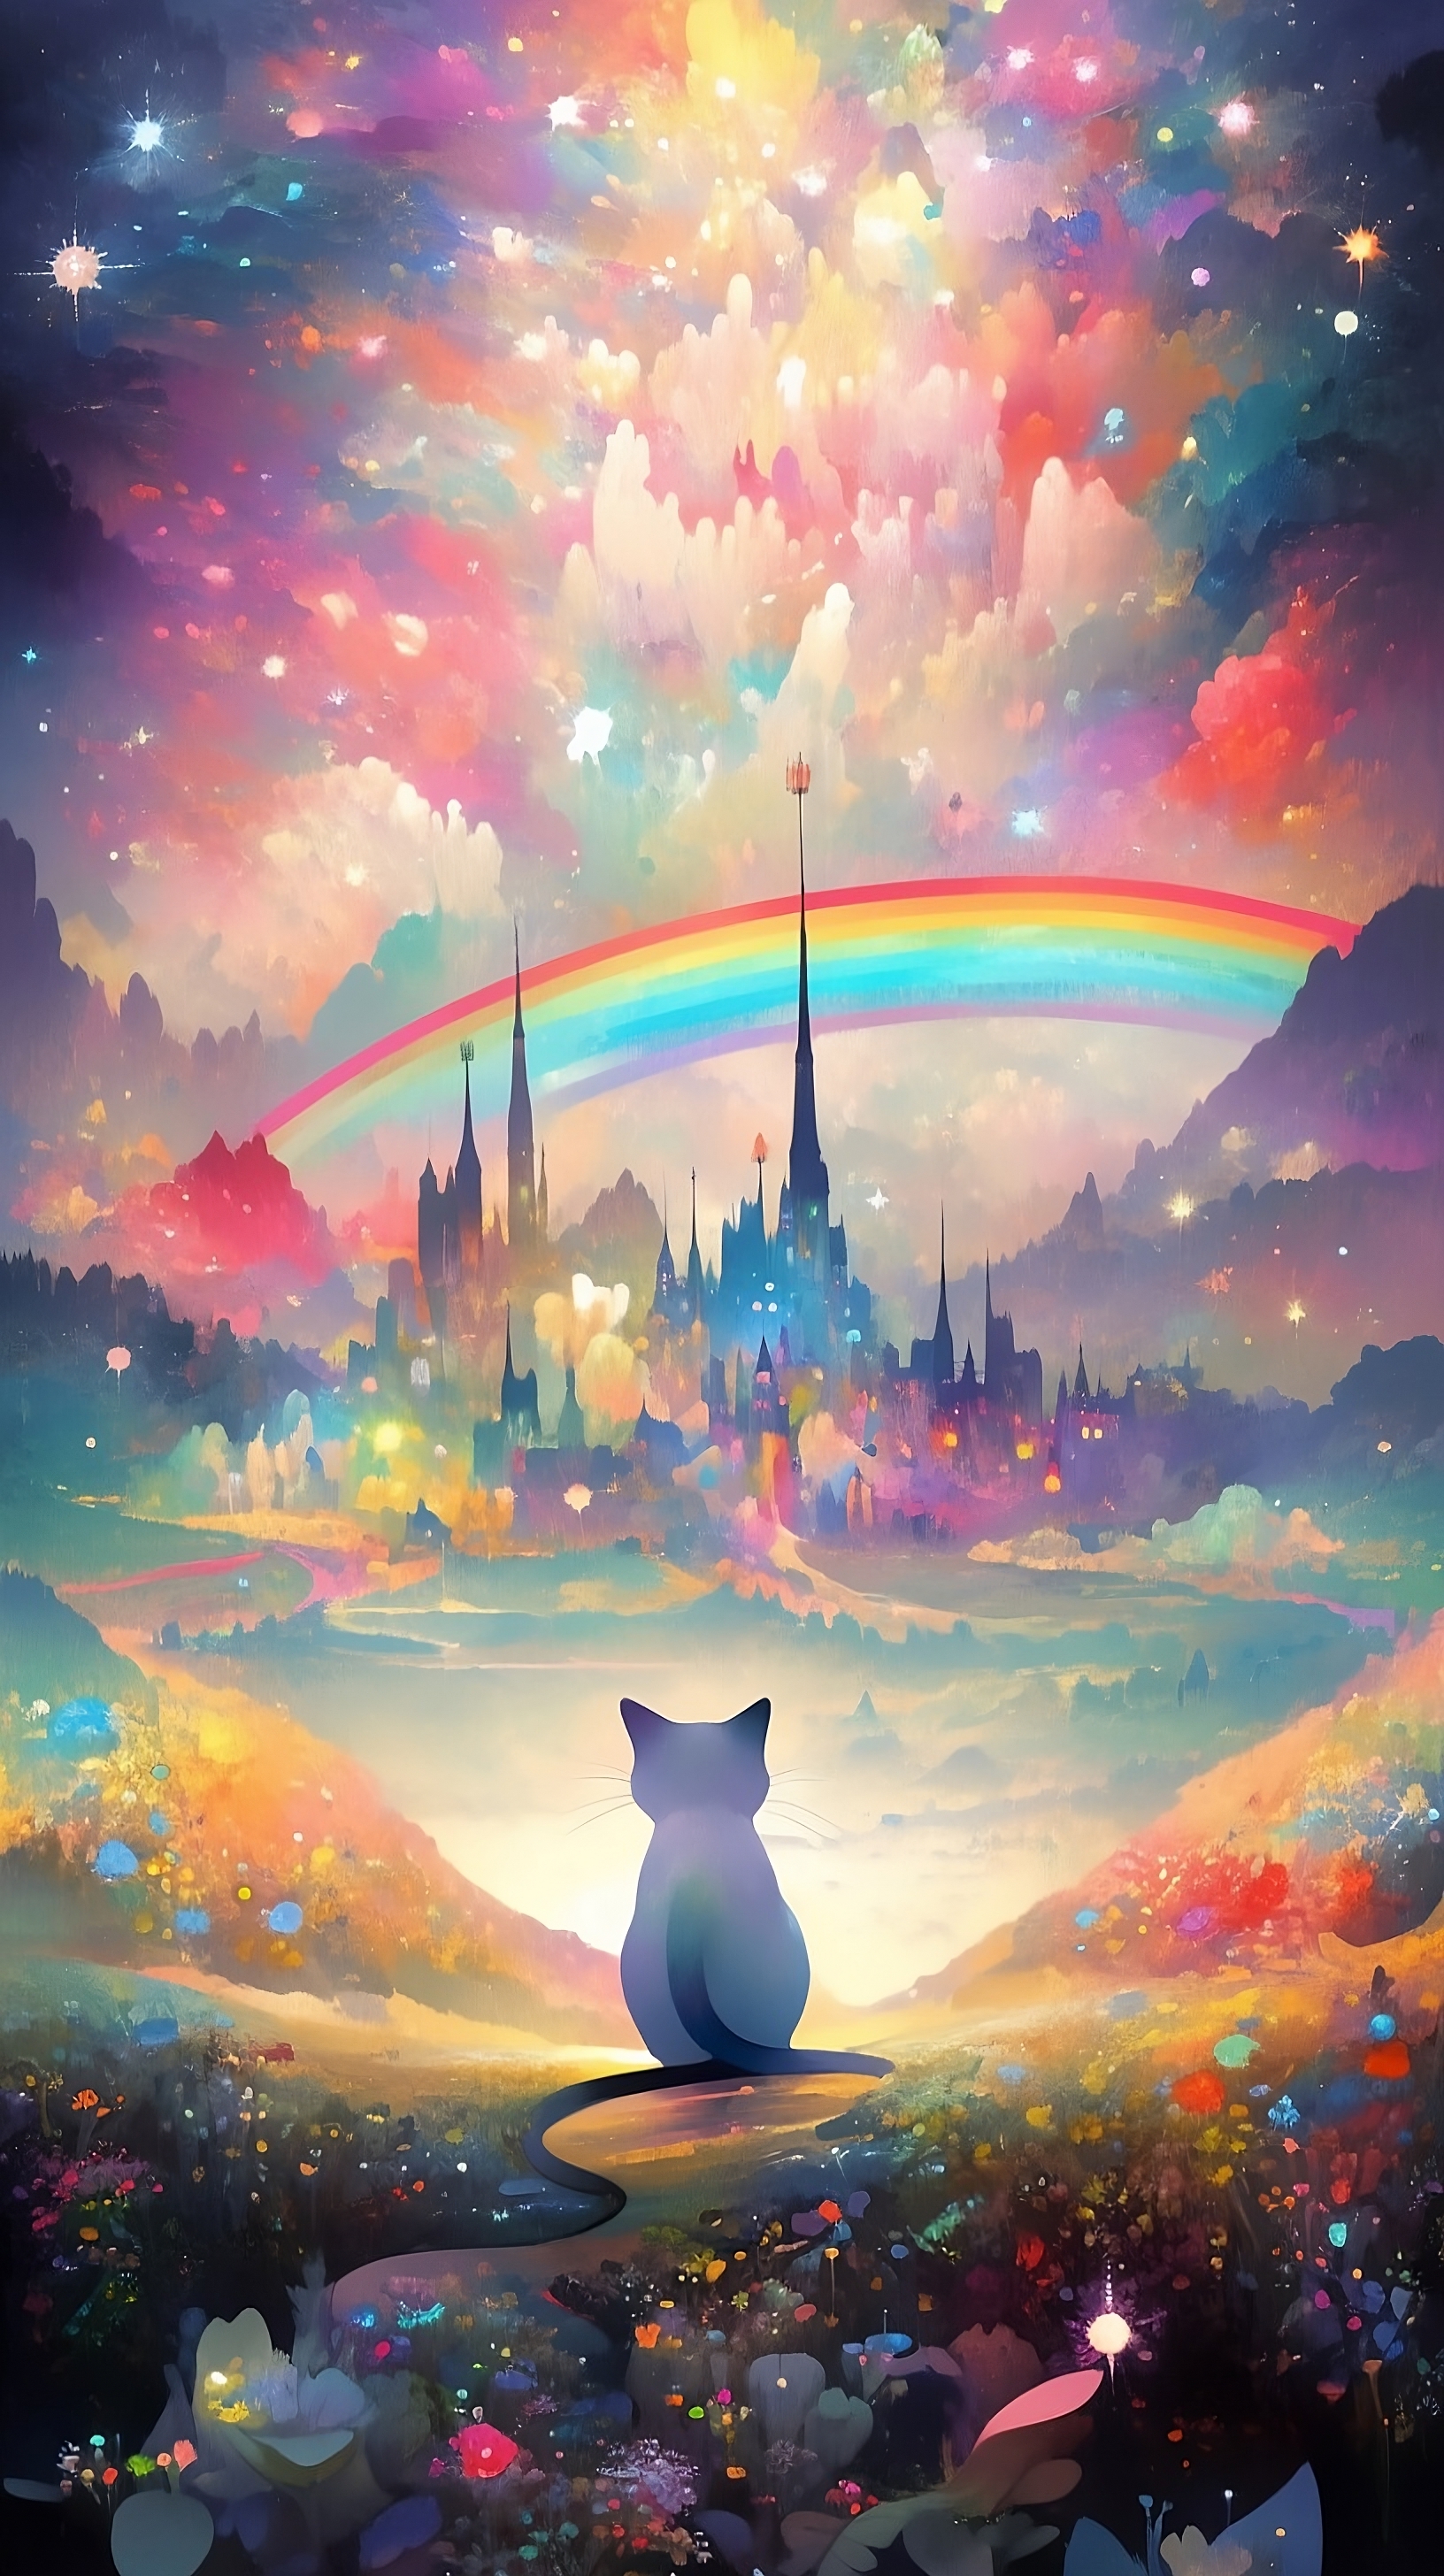 Thank you Wallpaper - Super Cute and Colorful by Elffyie on DeviantArt